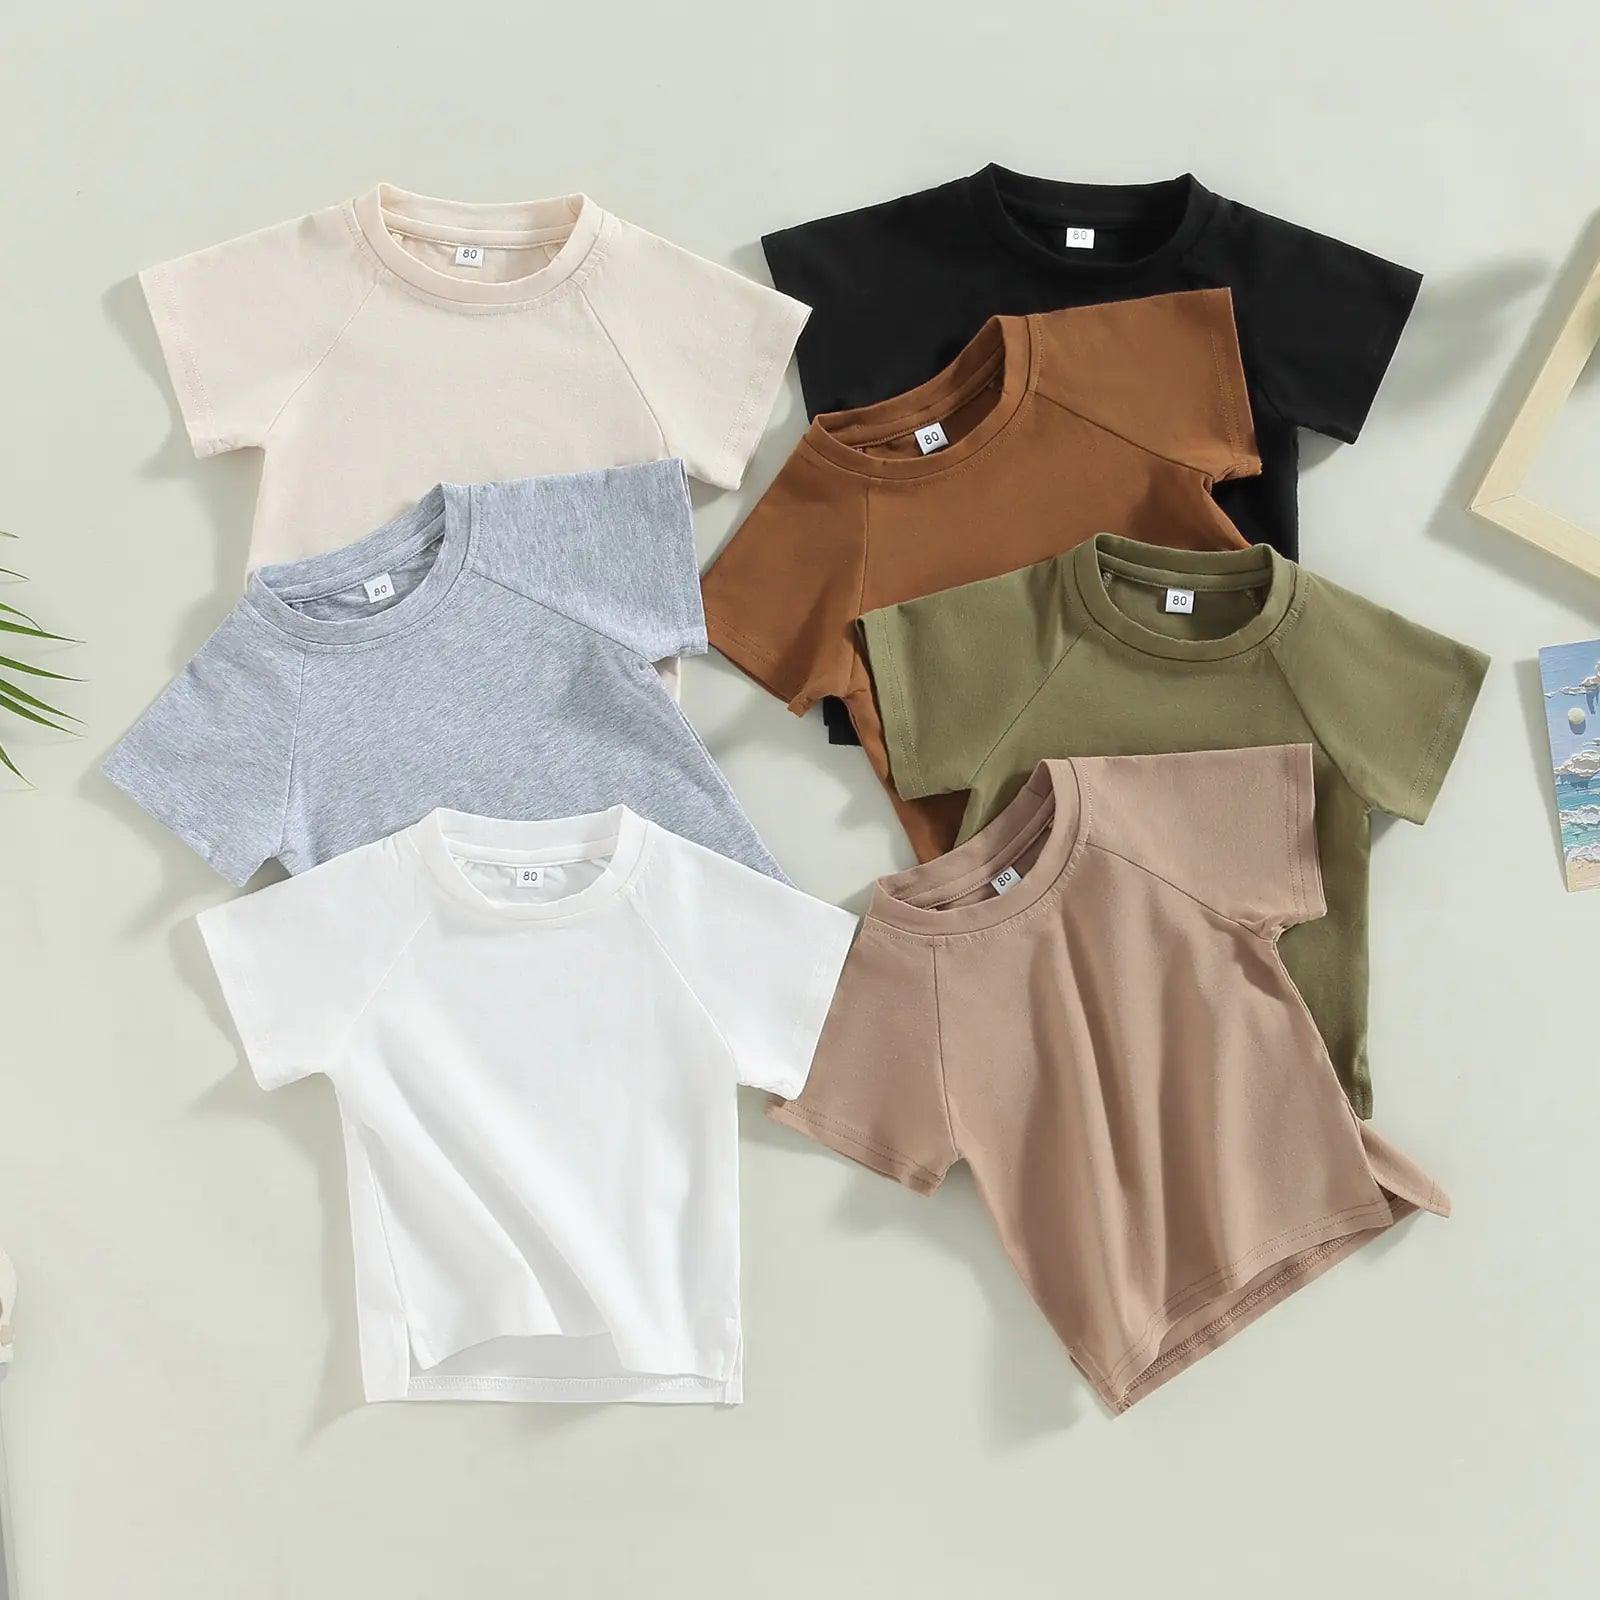 Toddler Kids Baby Girls Boys Summer Casual Tops - ACO Marketplace